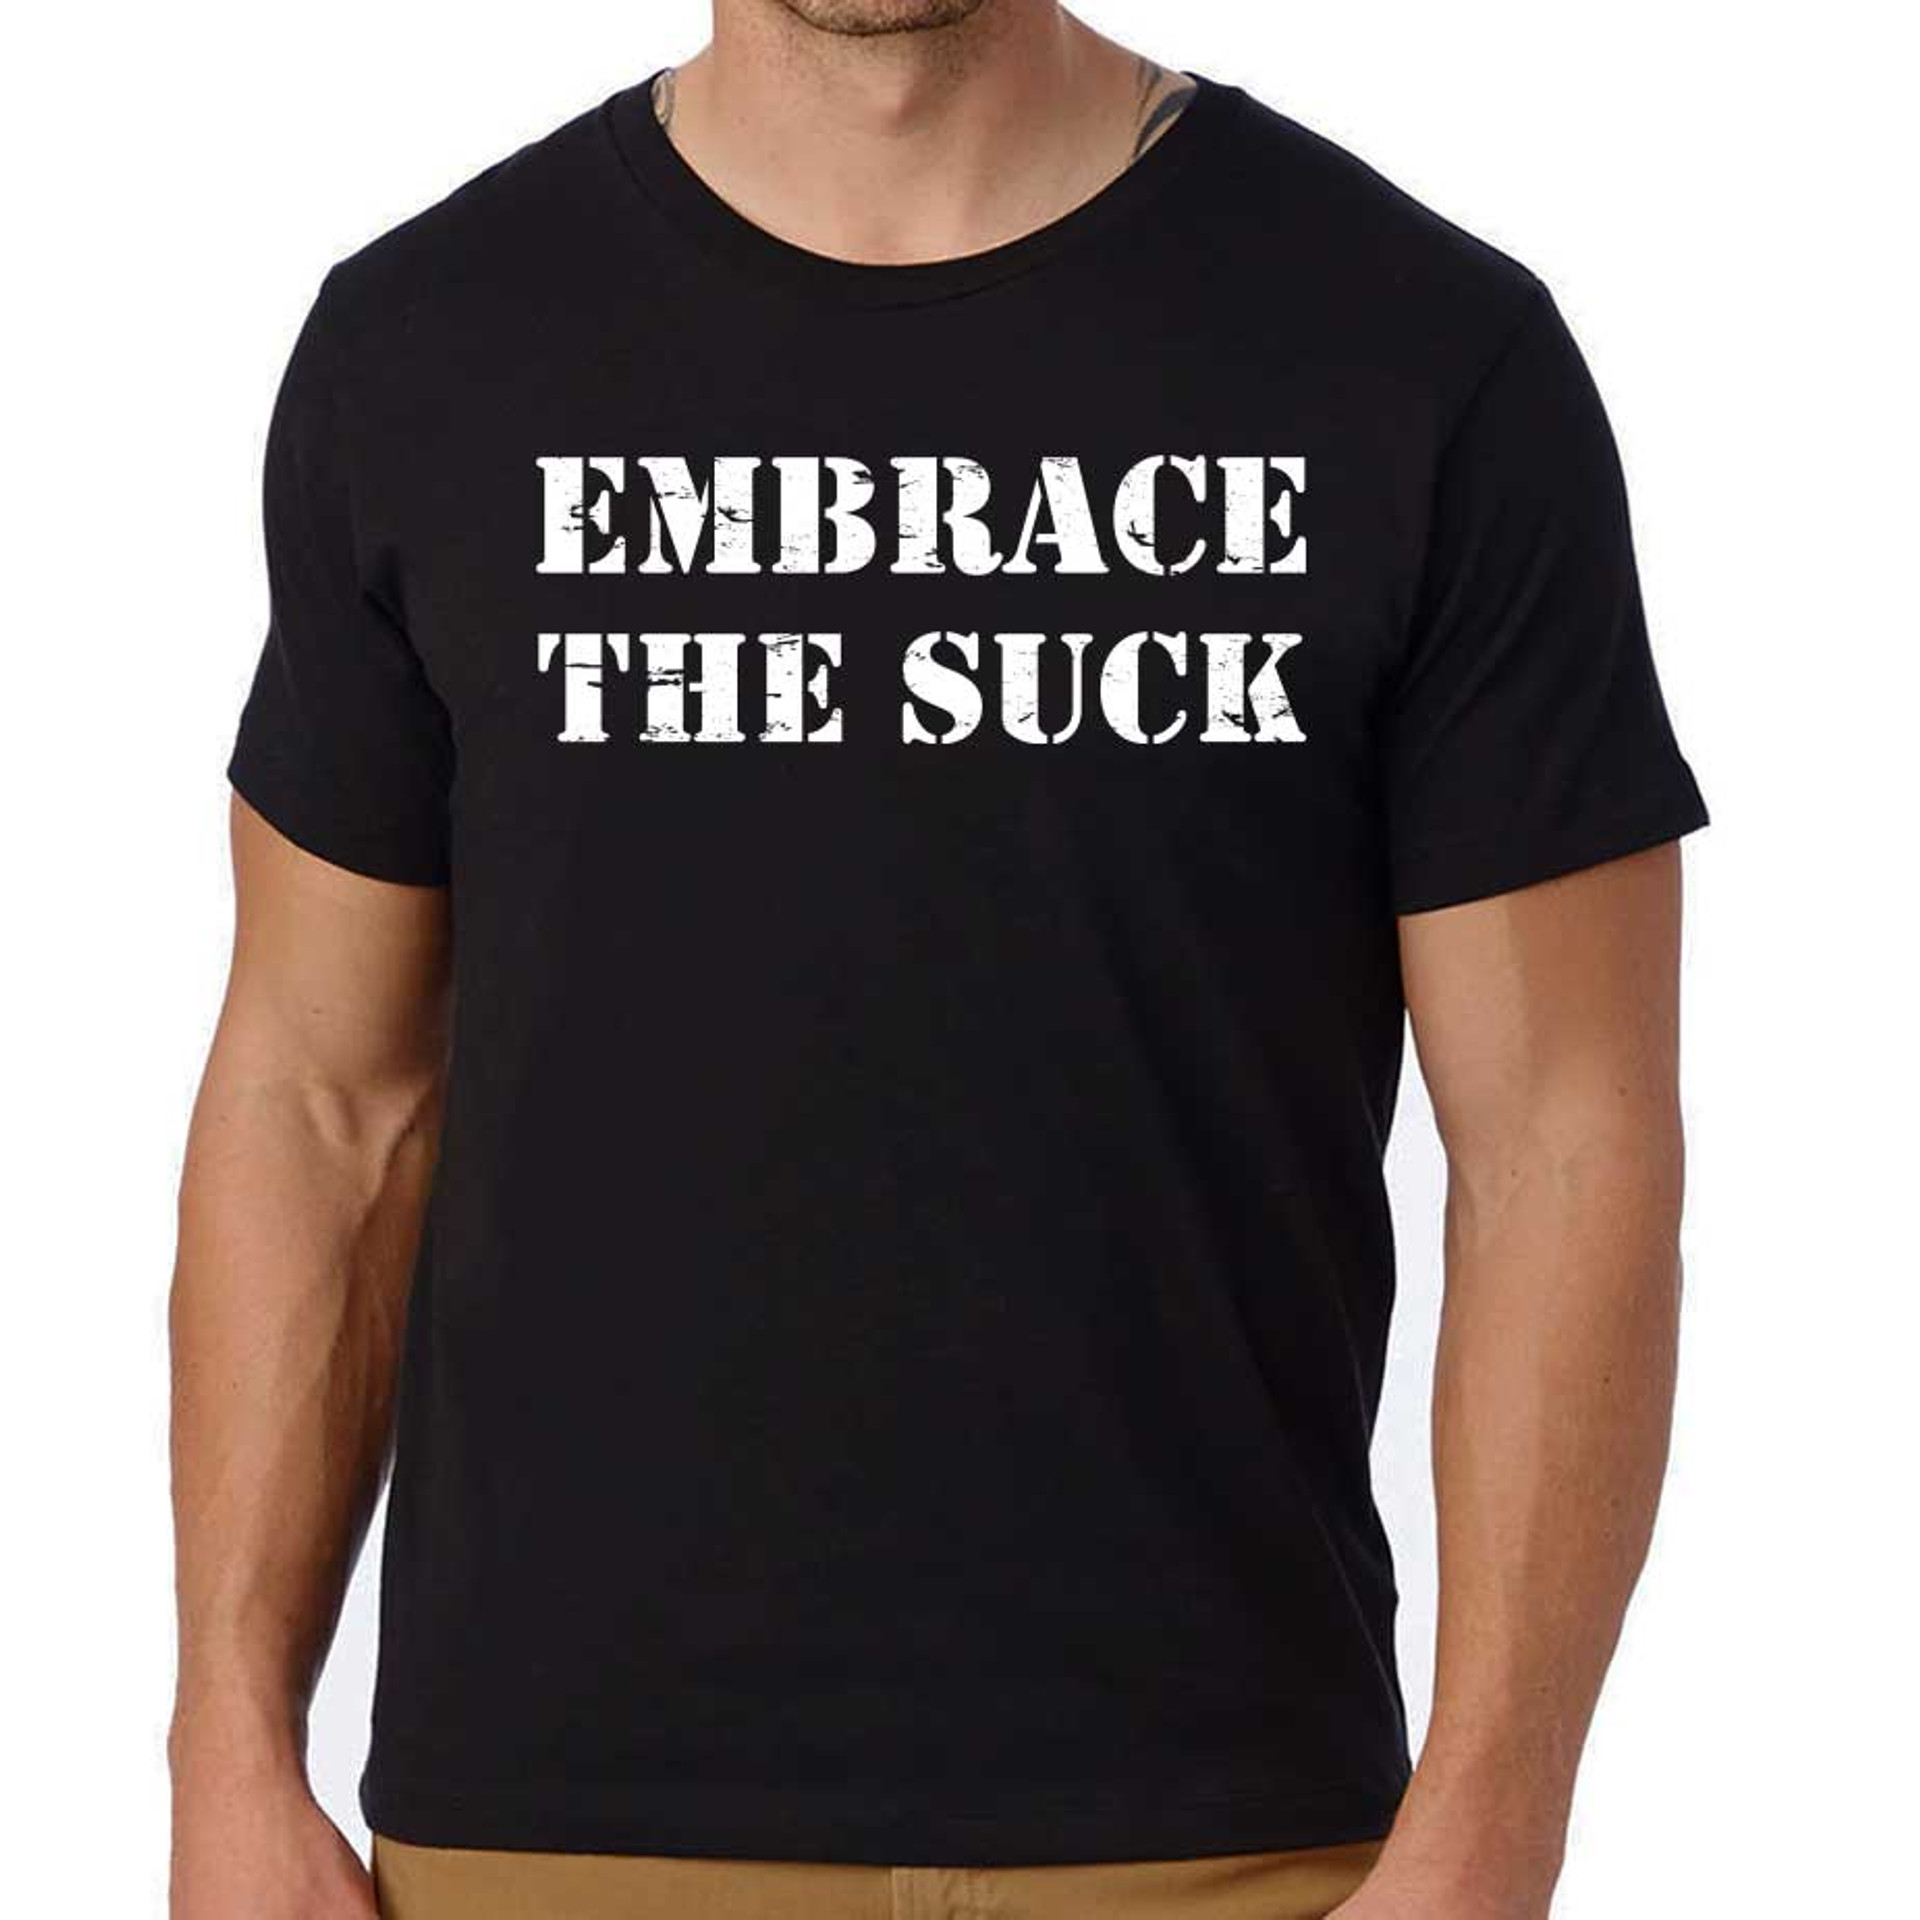 Embrace The Suck T-Shirt - Olive Drab Military Apparel